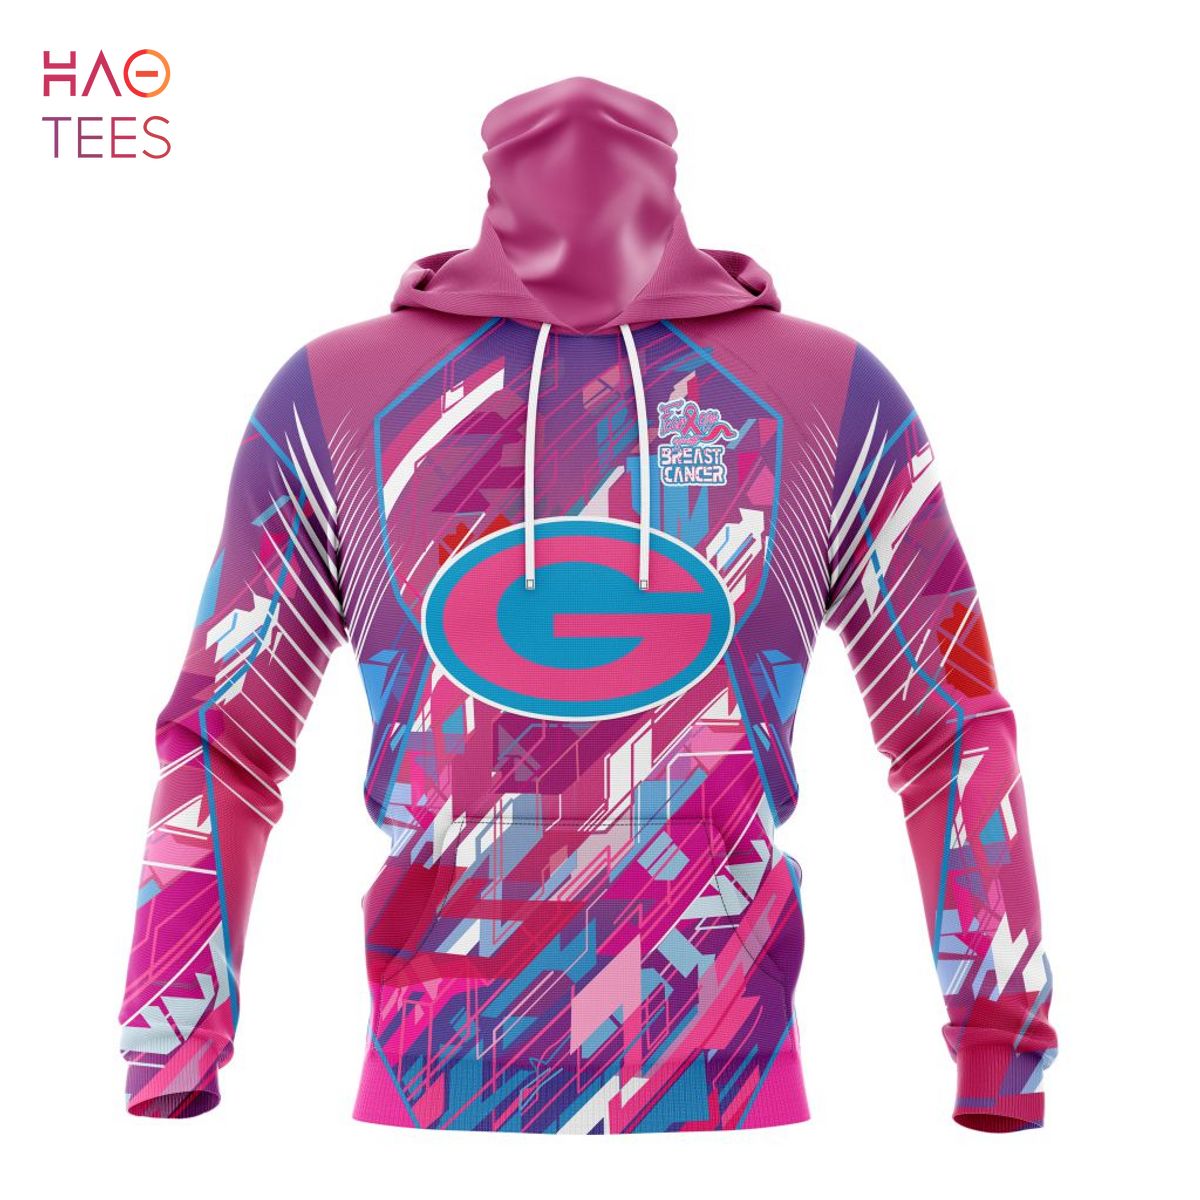 BEST NFL Green Bay Packers, Specialized Design I Pink I Can! Fearless Again Breast Cancer 3D Hoodie